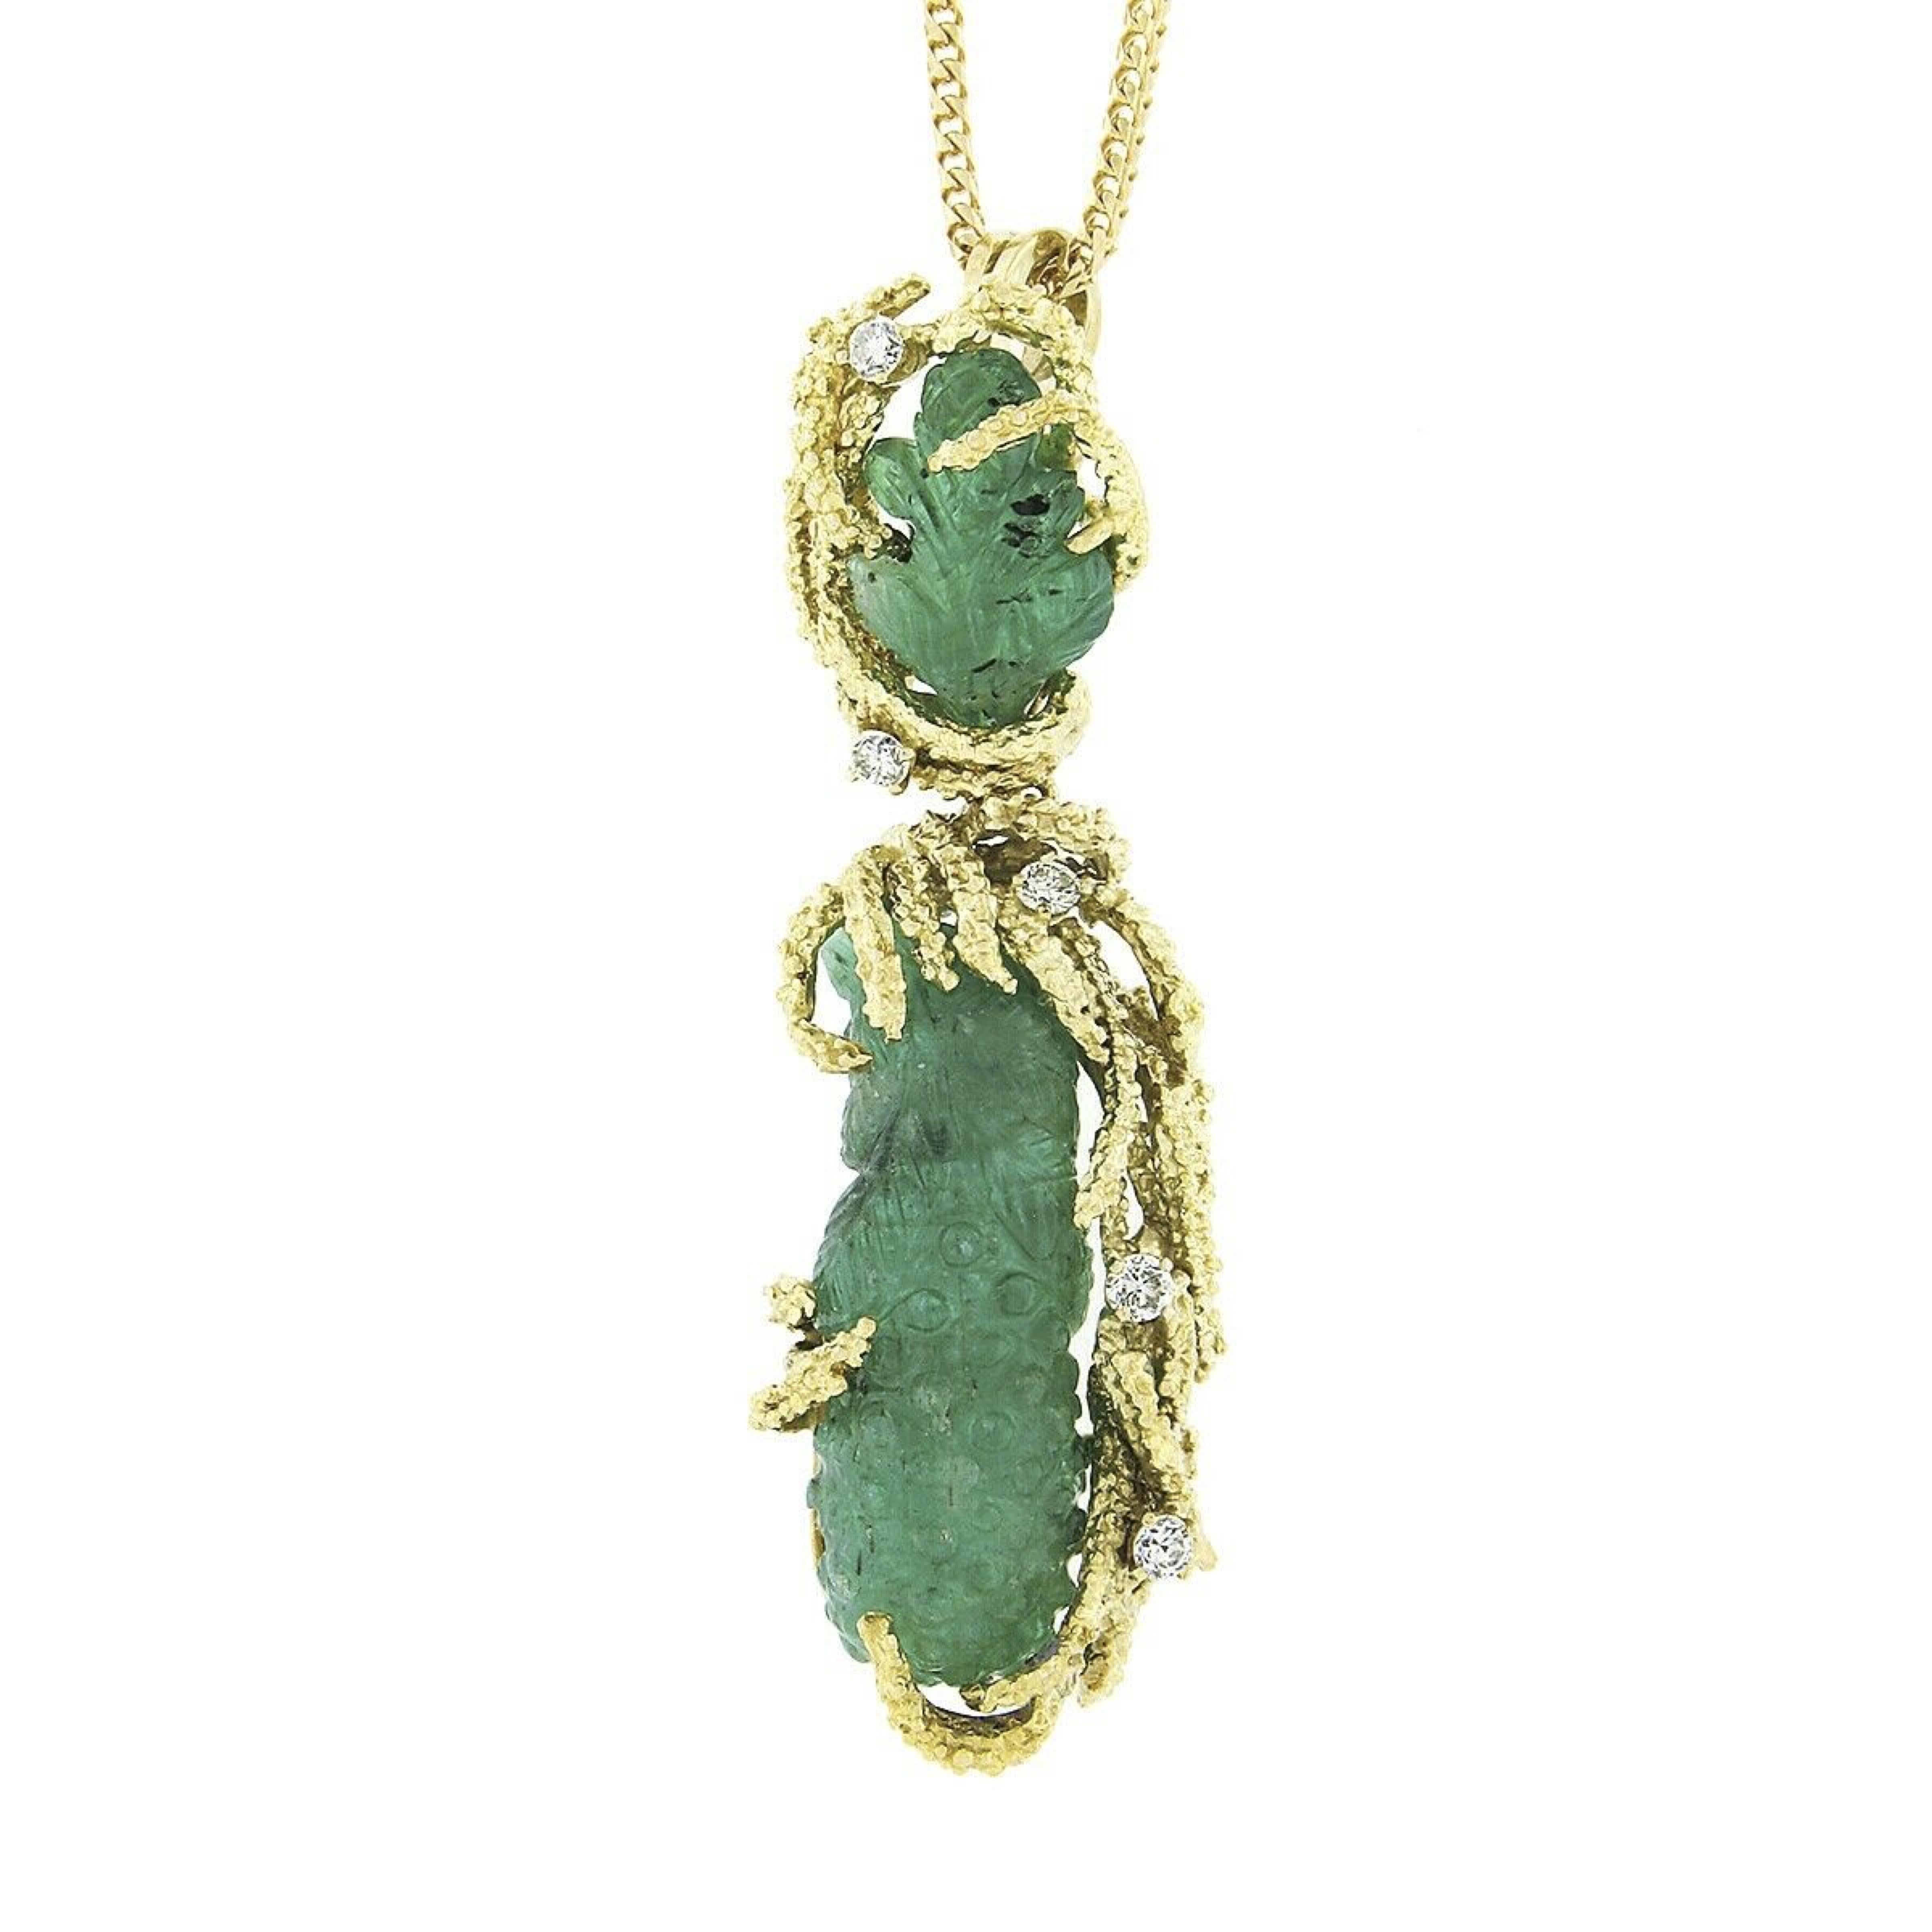 Here we have a magnificent vintage pendant that was crafted from solid 18k yellow gold. It features a drop dangle style that carries two fine emeralds, one of which is GIA certified, and diamonds accents throughout. The emeralds show a deep green